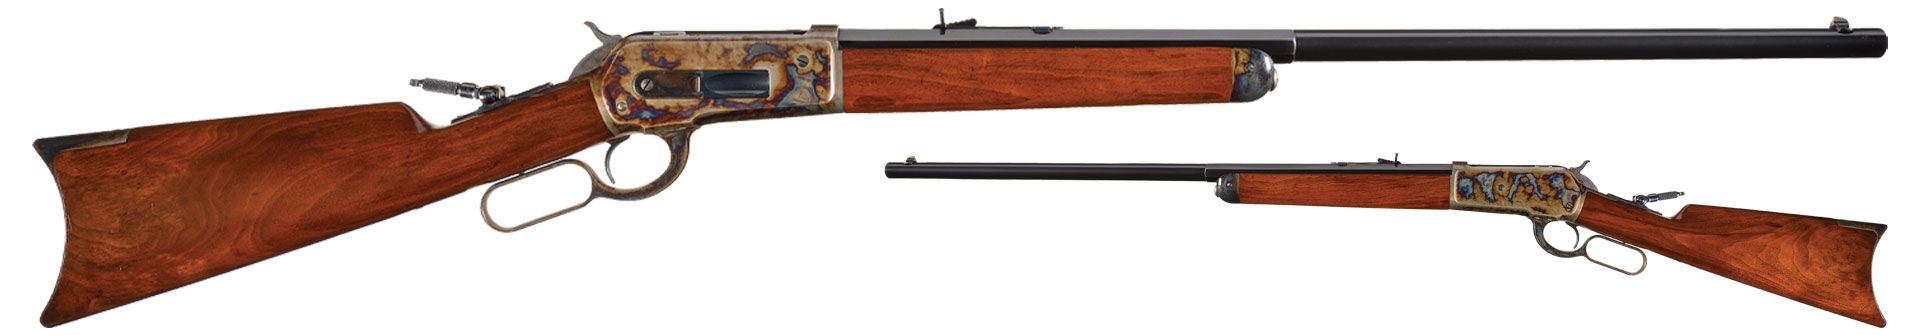 Lot 1054: Winchester Model 1886 Lever Action Rifle